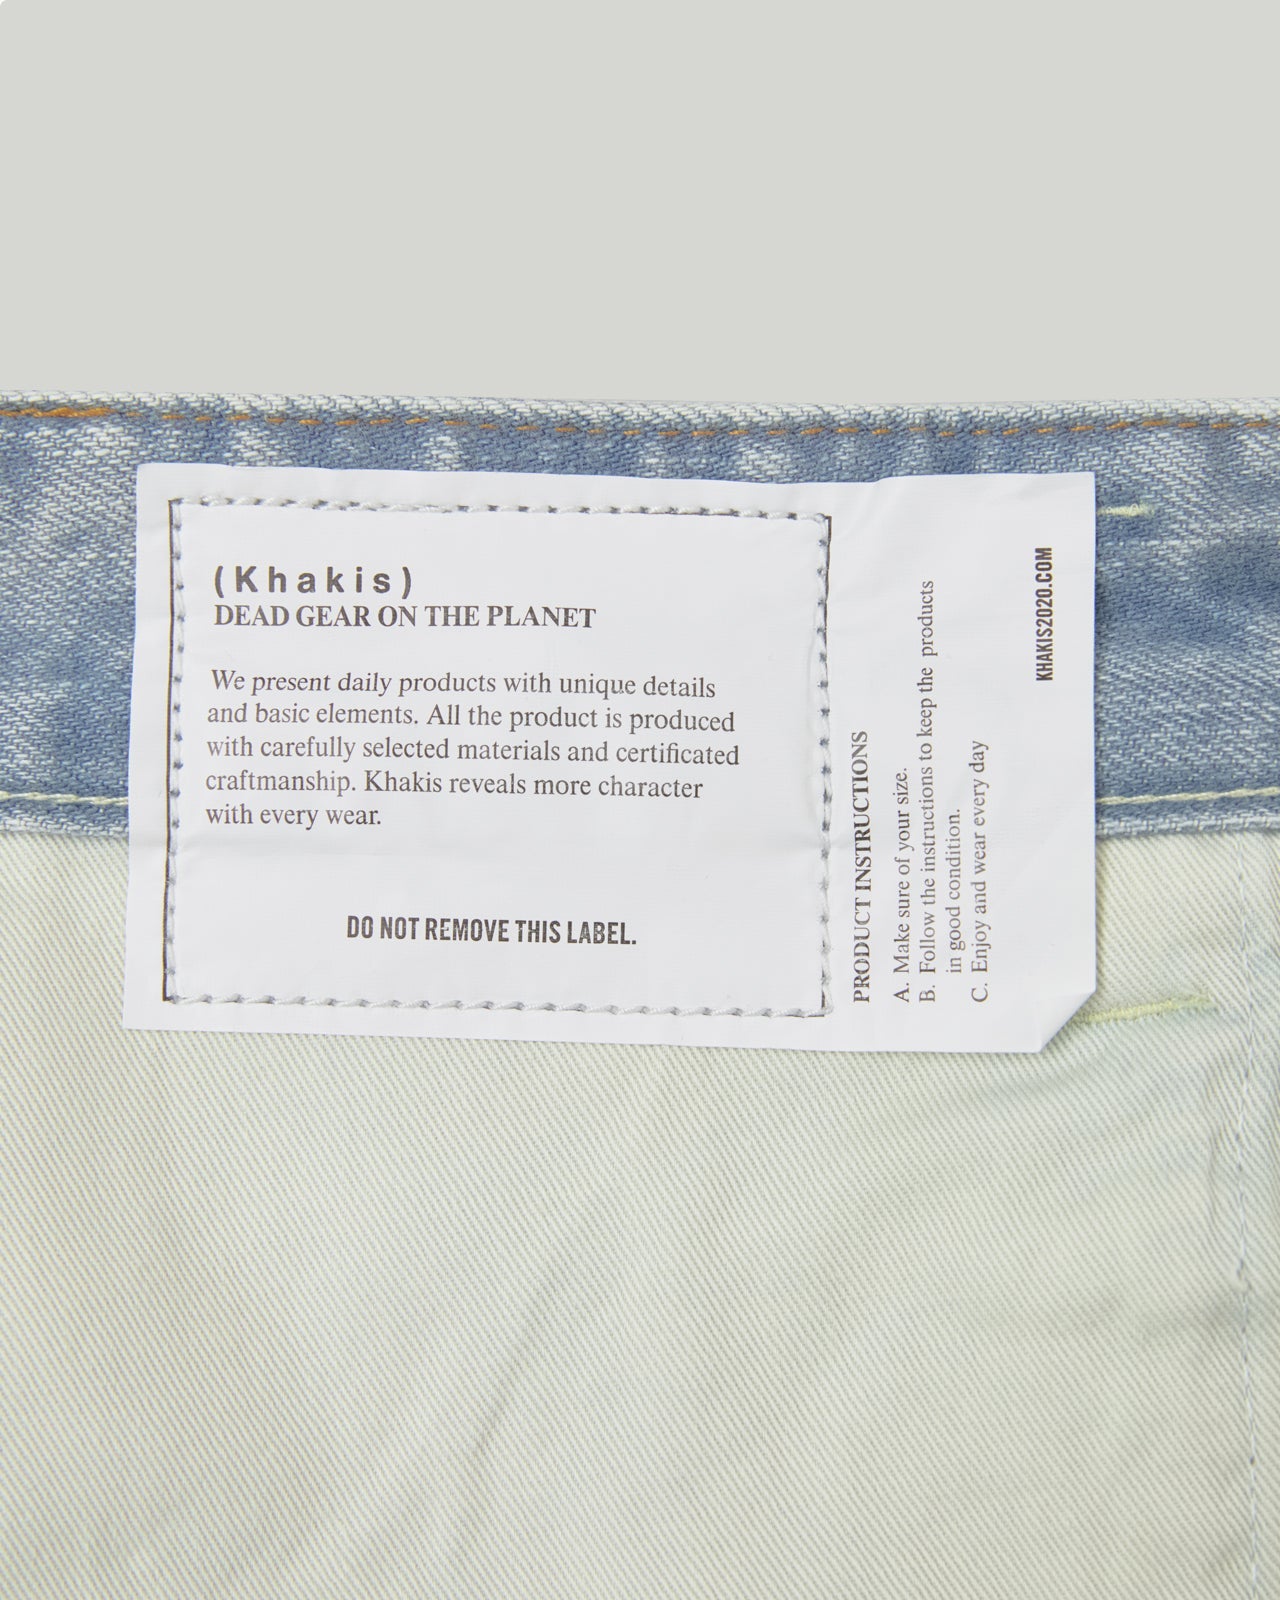 Relaxed 5P Jean Light Blue